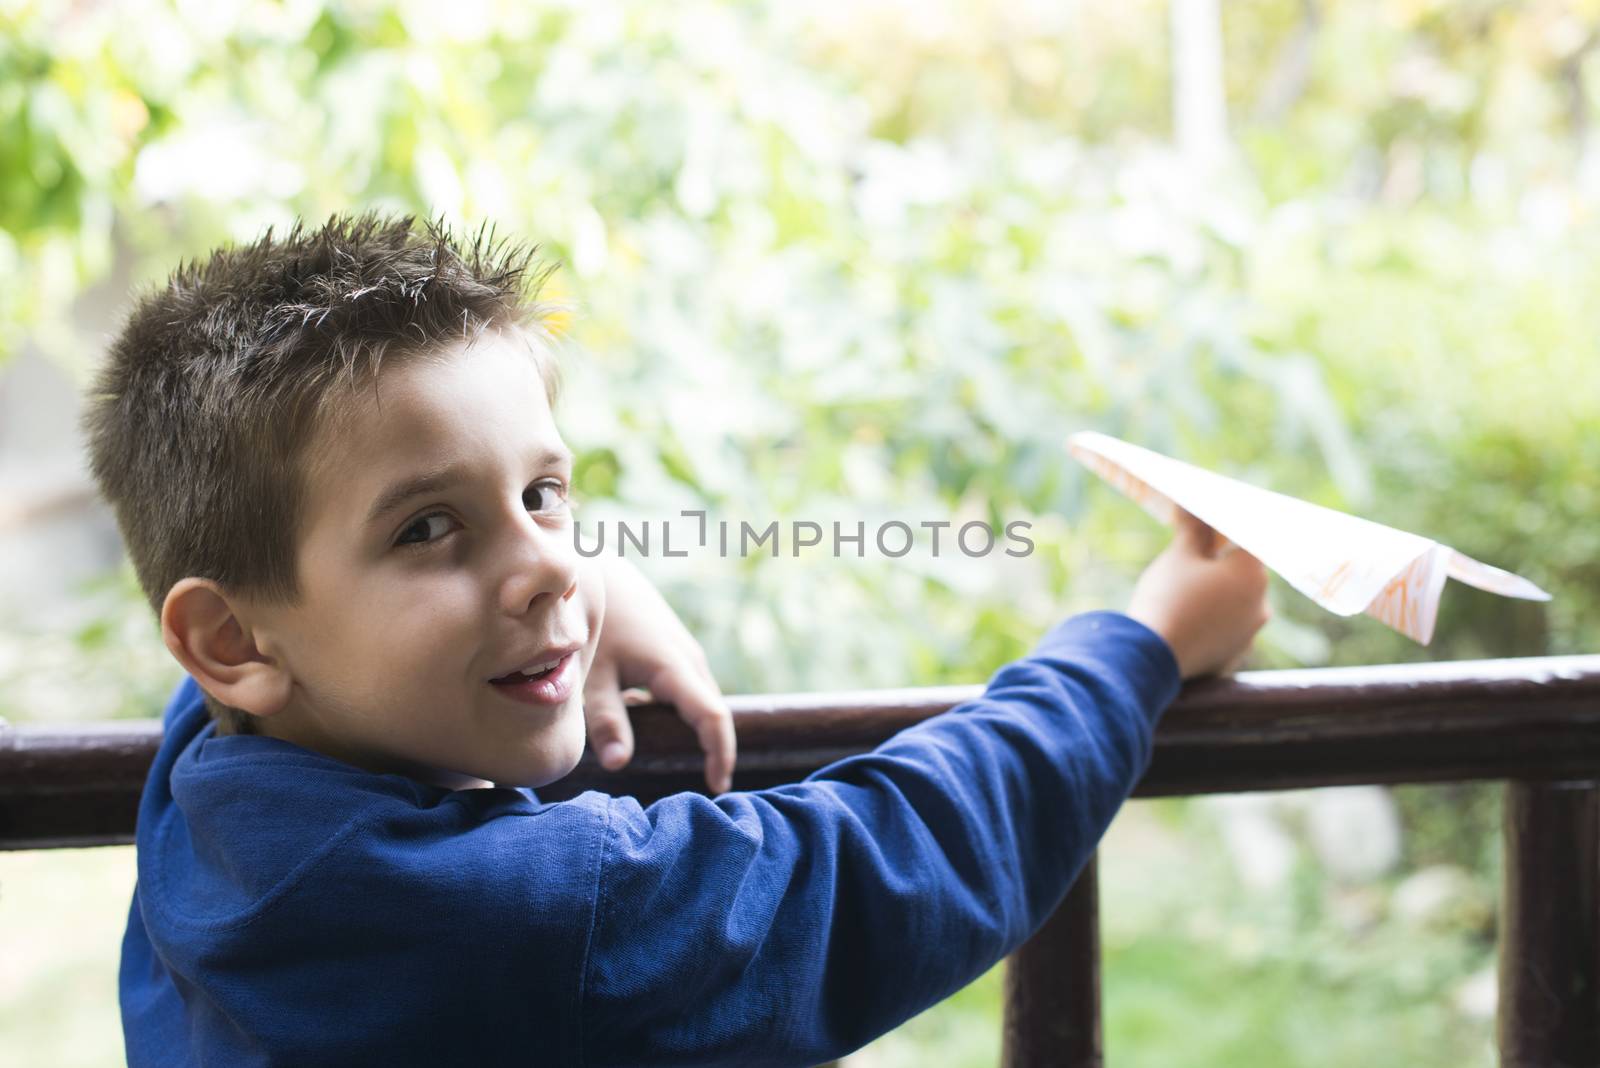 Kid throws paper plane. Authentic image